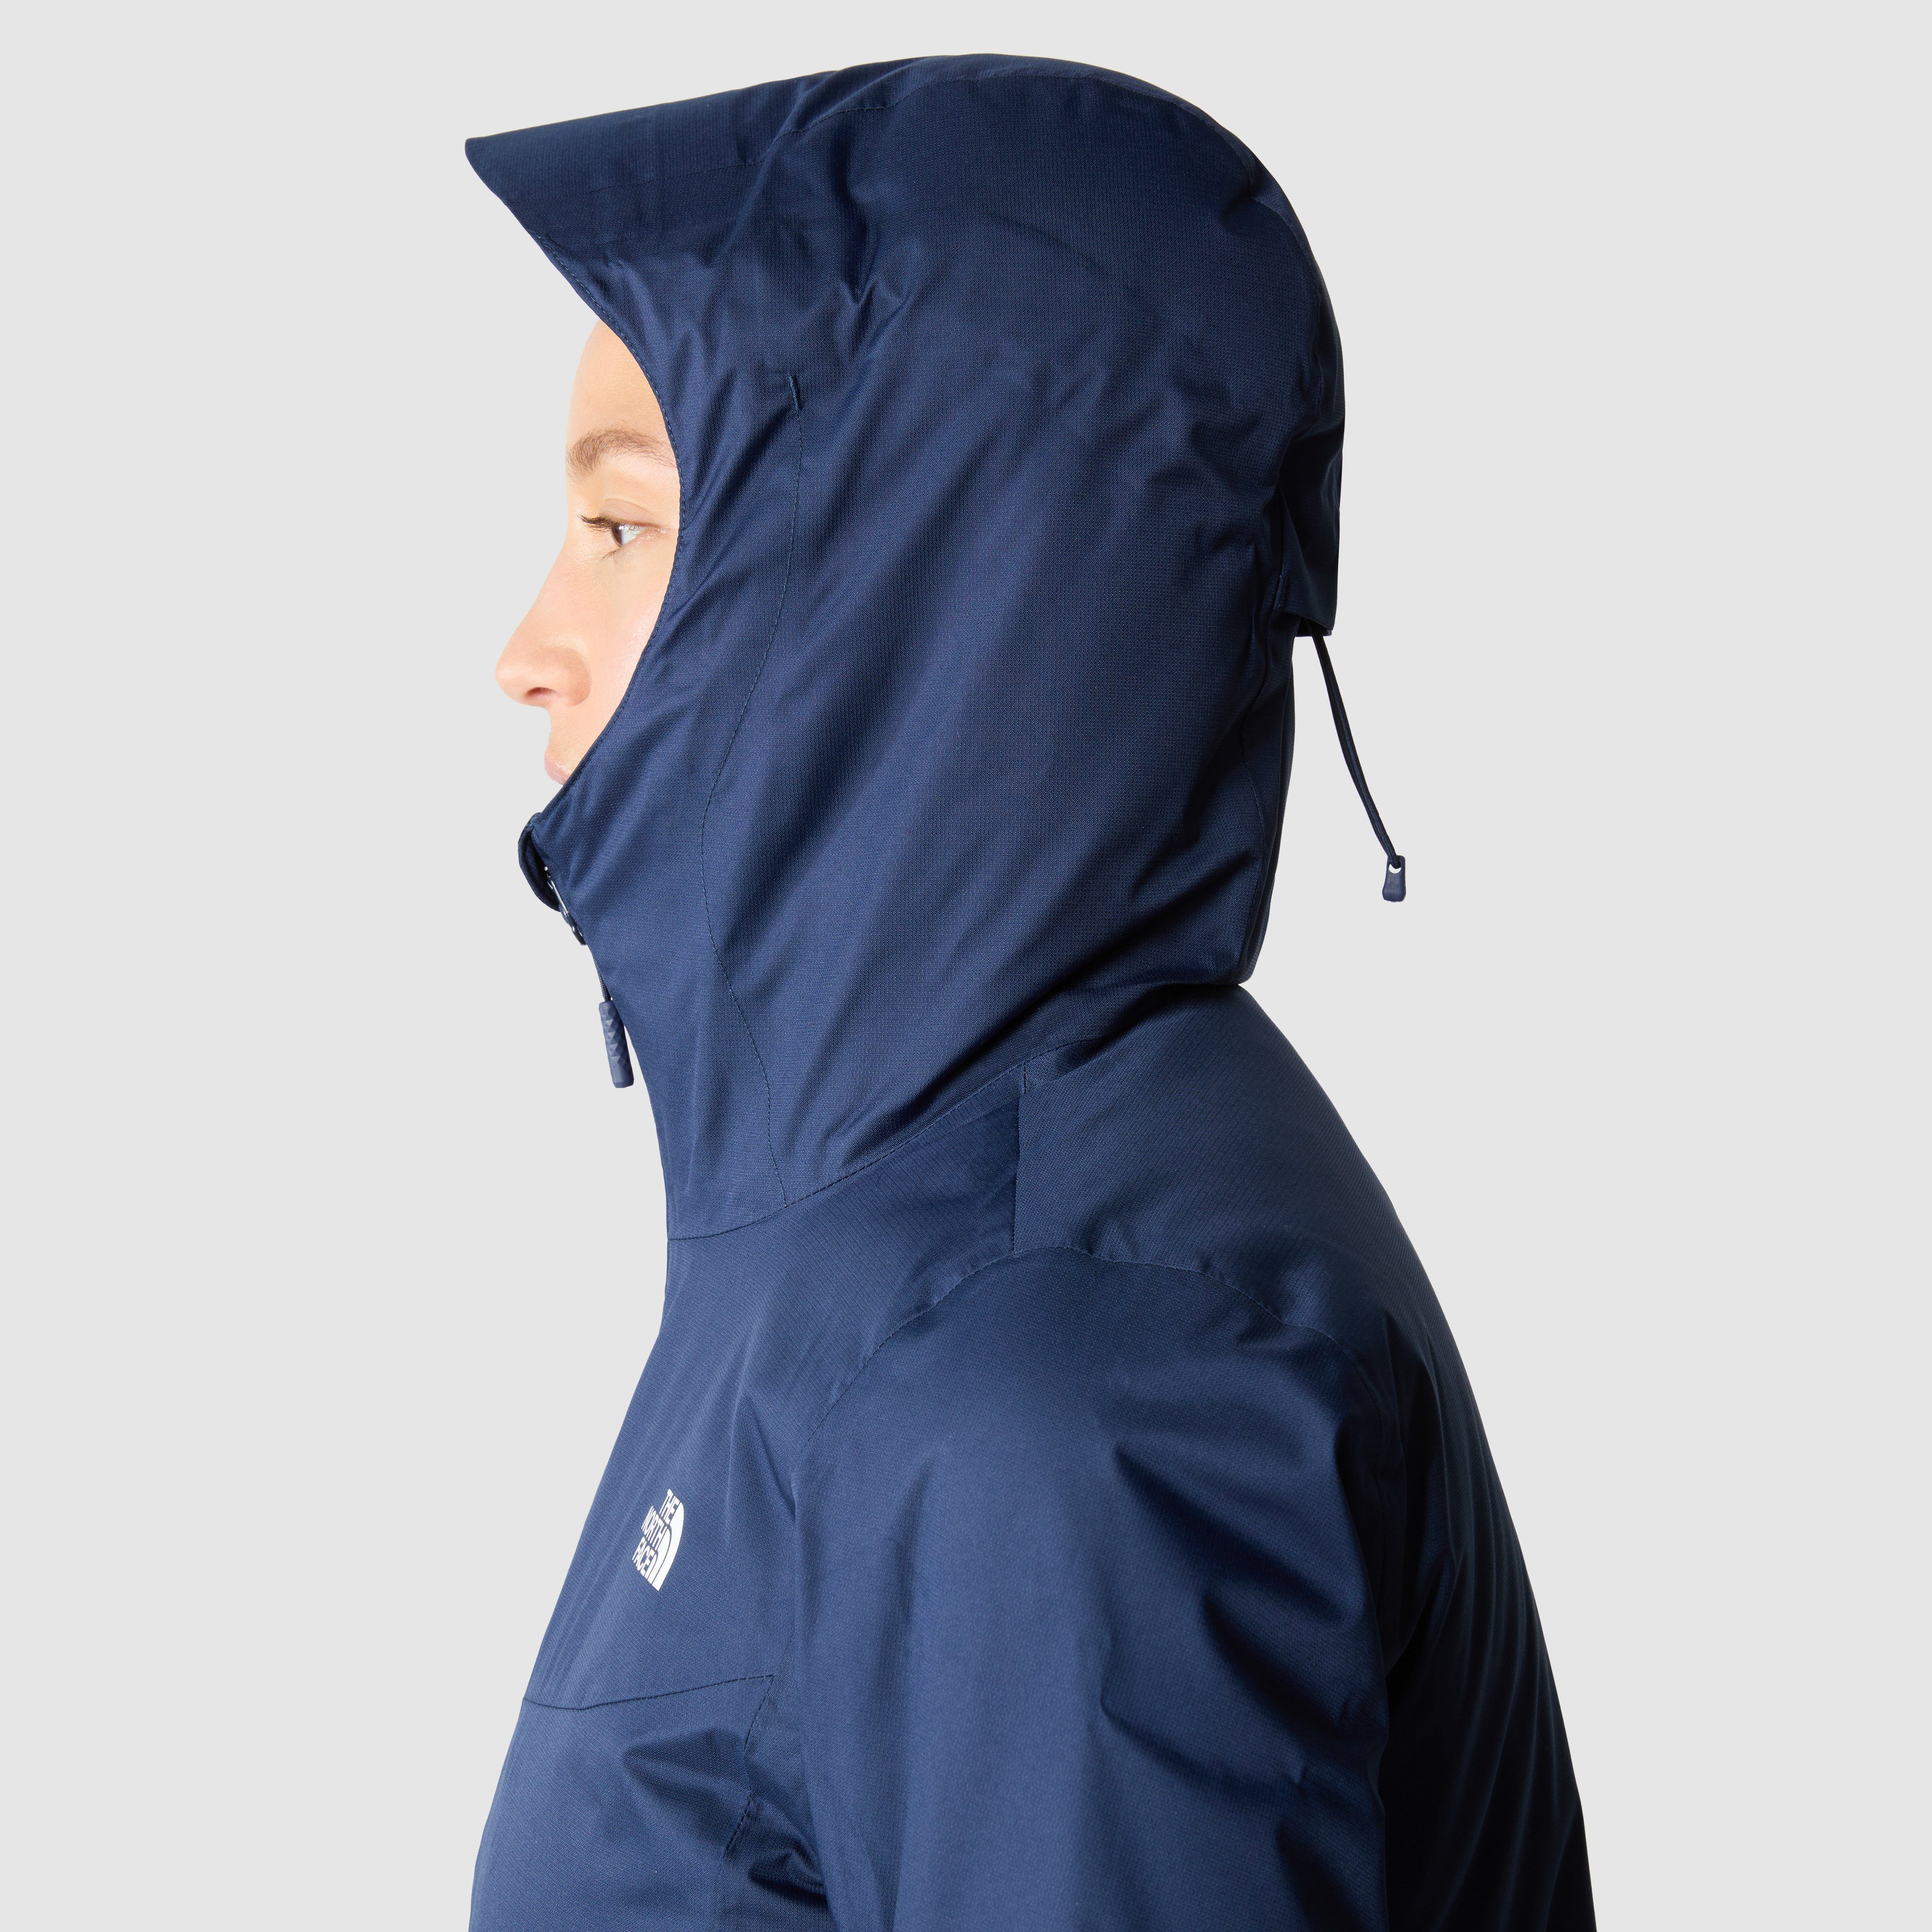 Logodruck The W mit QUEST North JACKET Funktionsjacke INSULATED Face